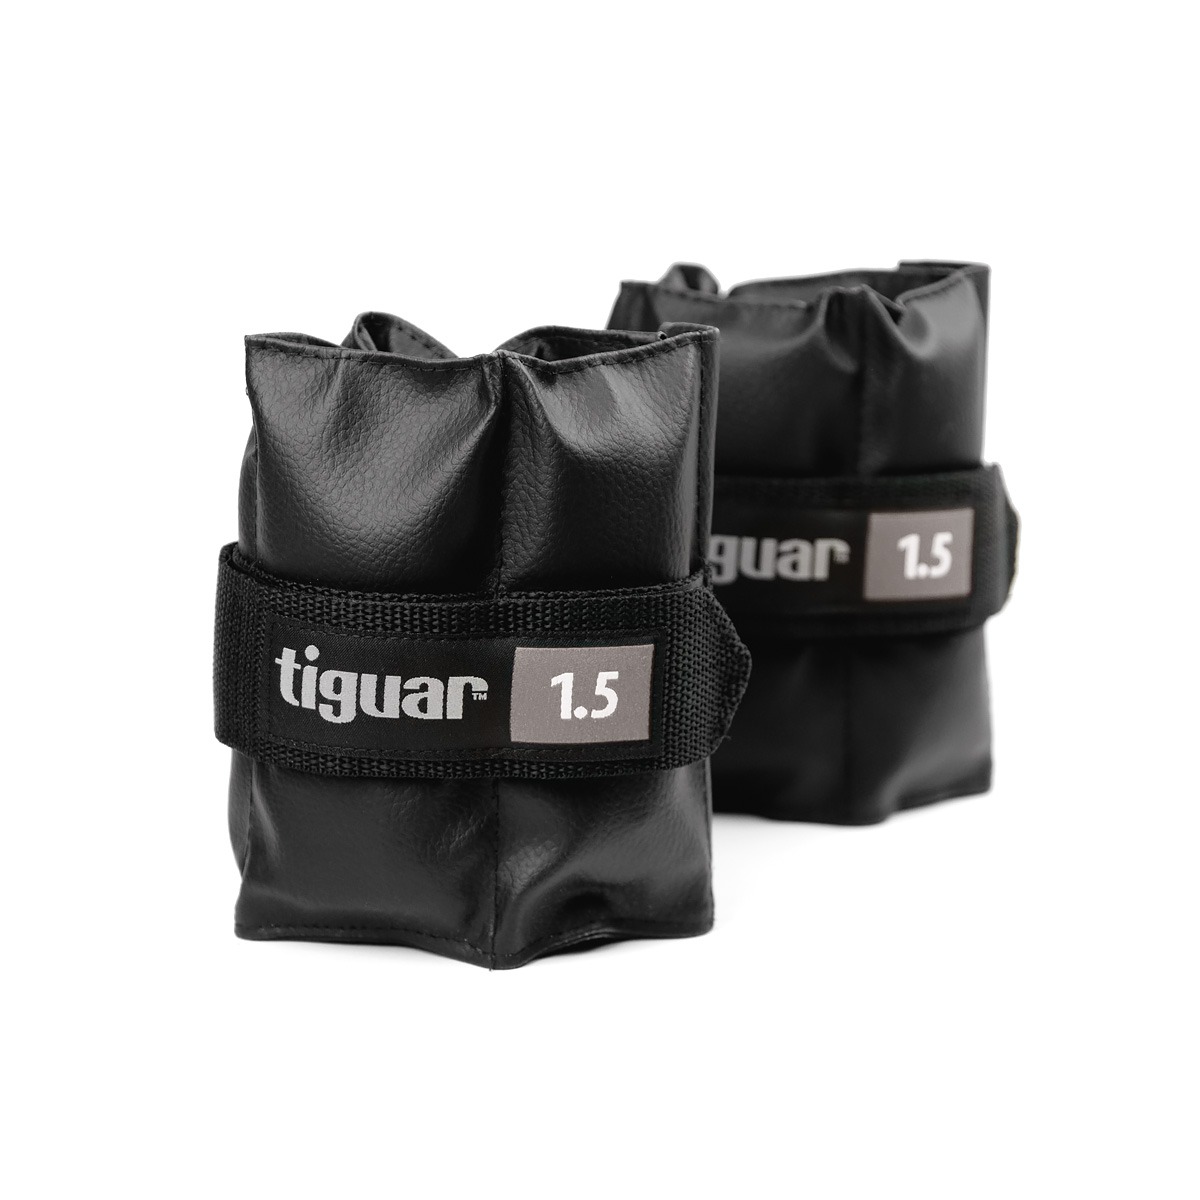 tiguar ankle weights